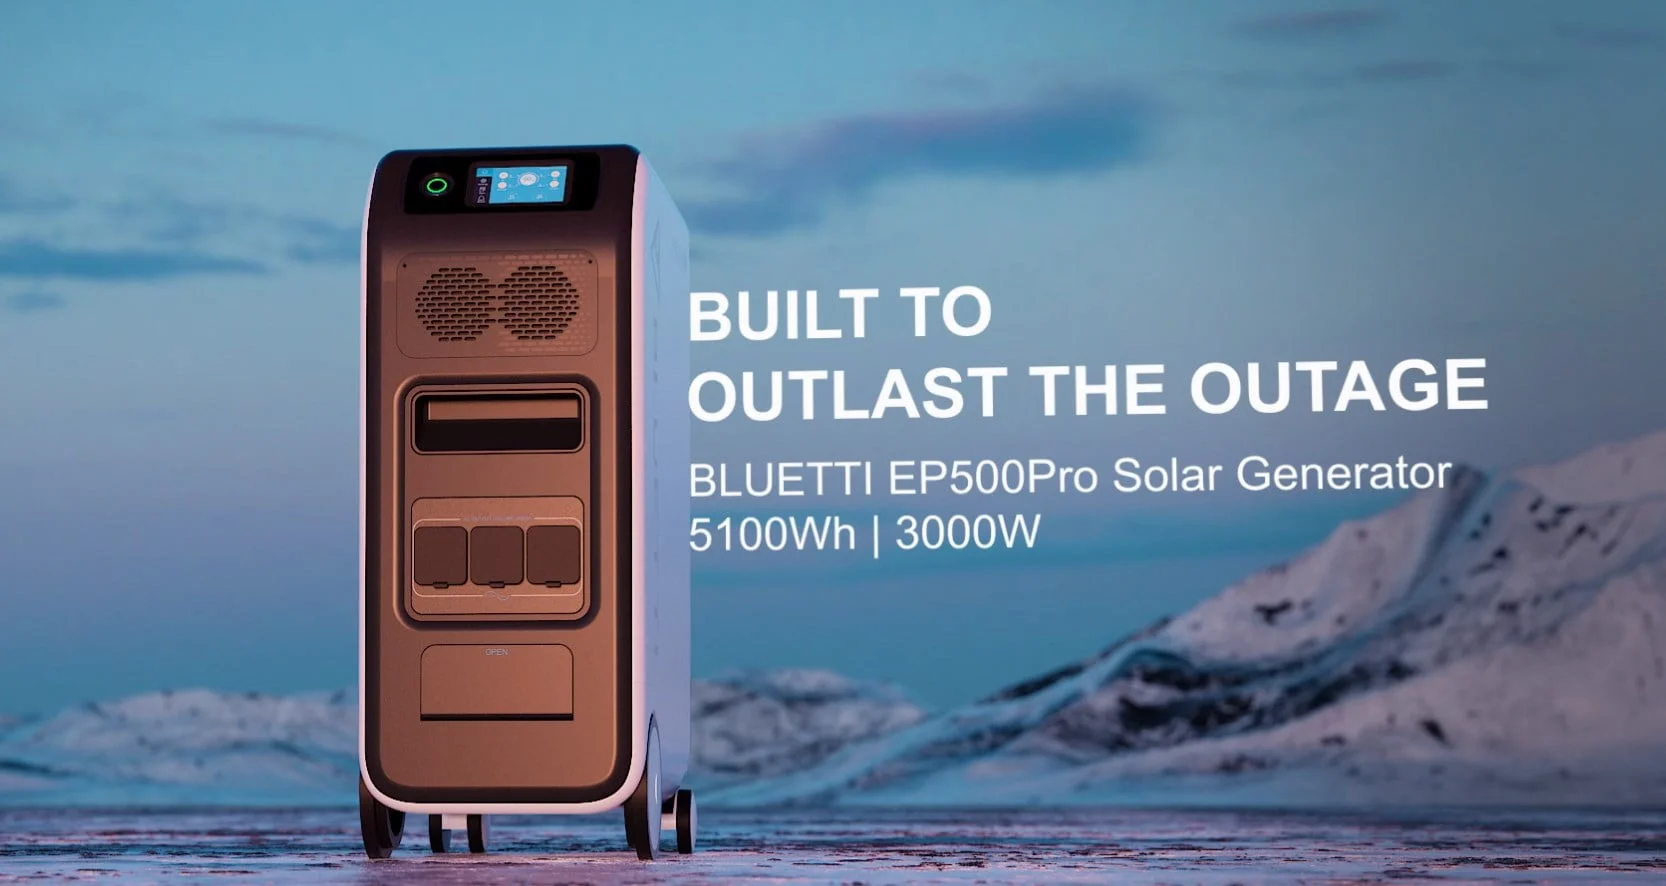 Bluetti EP500 Pro 5100Wh power station now available in the UK for £4999 with discount, providing whole-home backup power